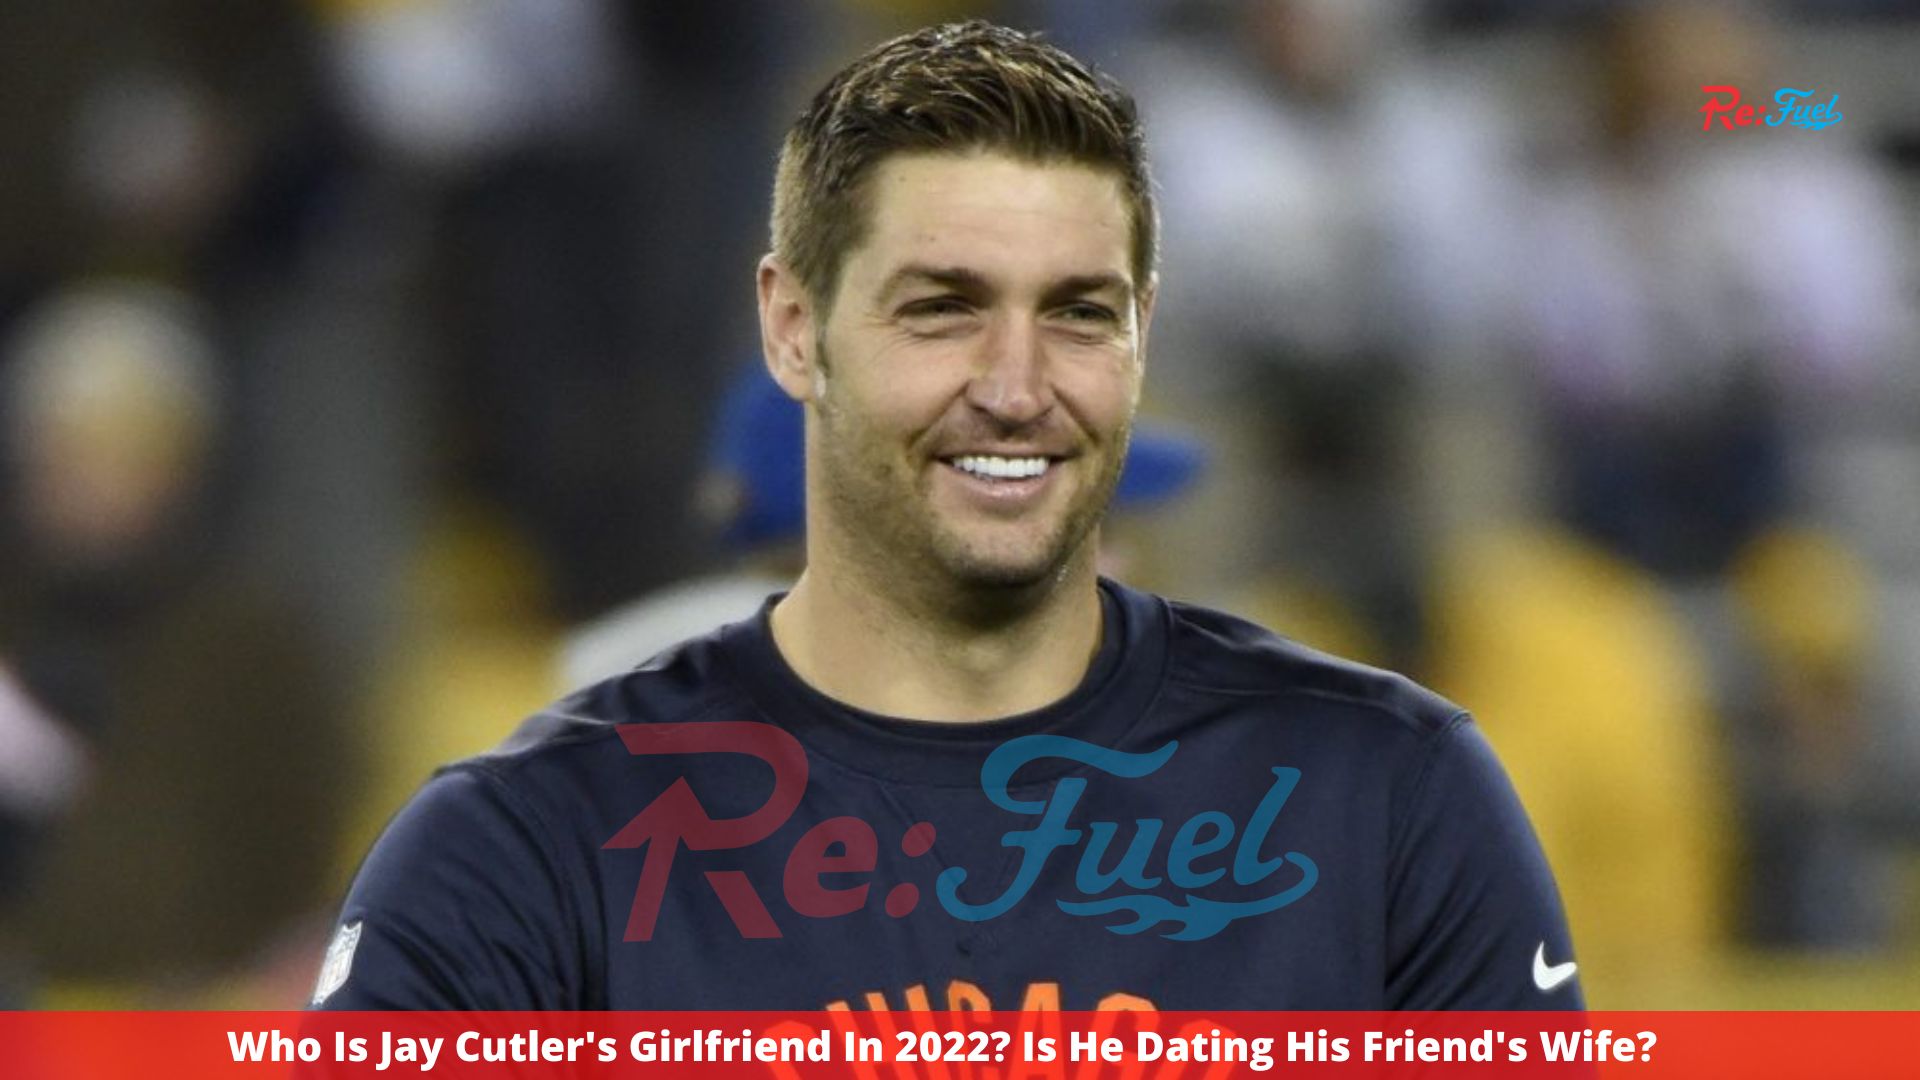 Who Is Jay Cutler's Girlfriend In 2022? Is He Dating His Friend's Wife?